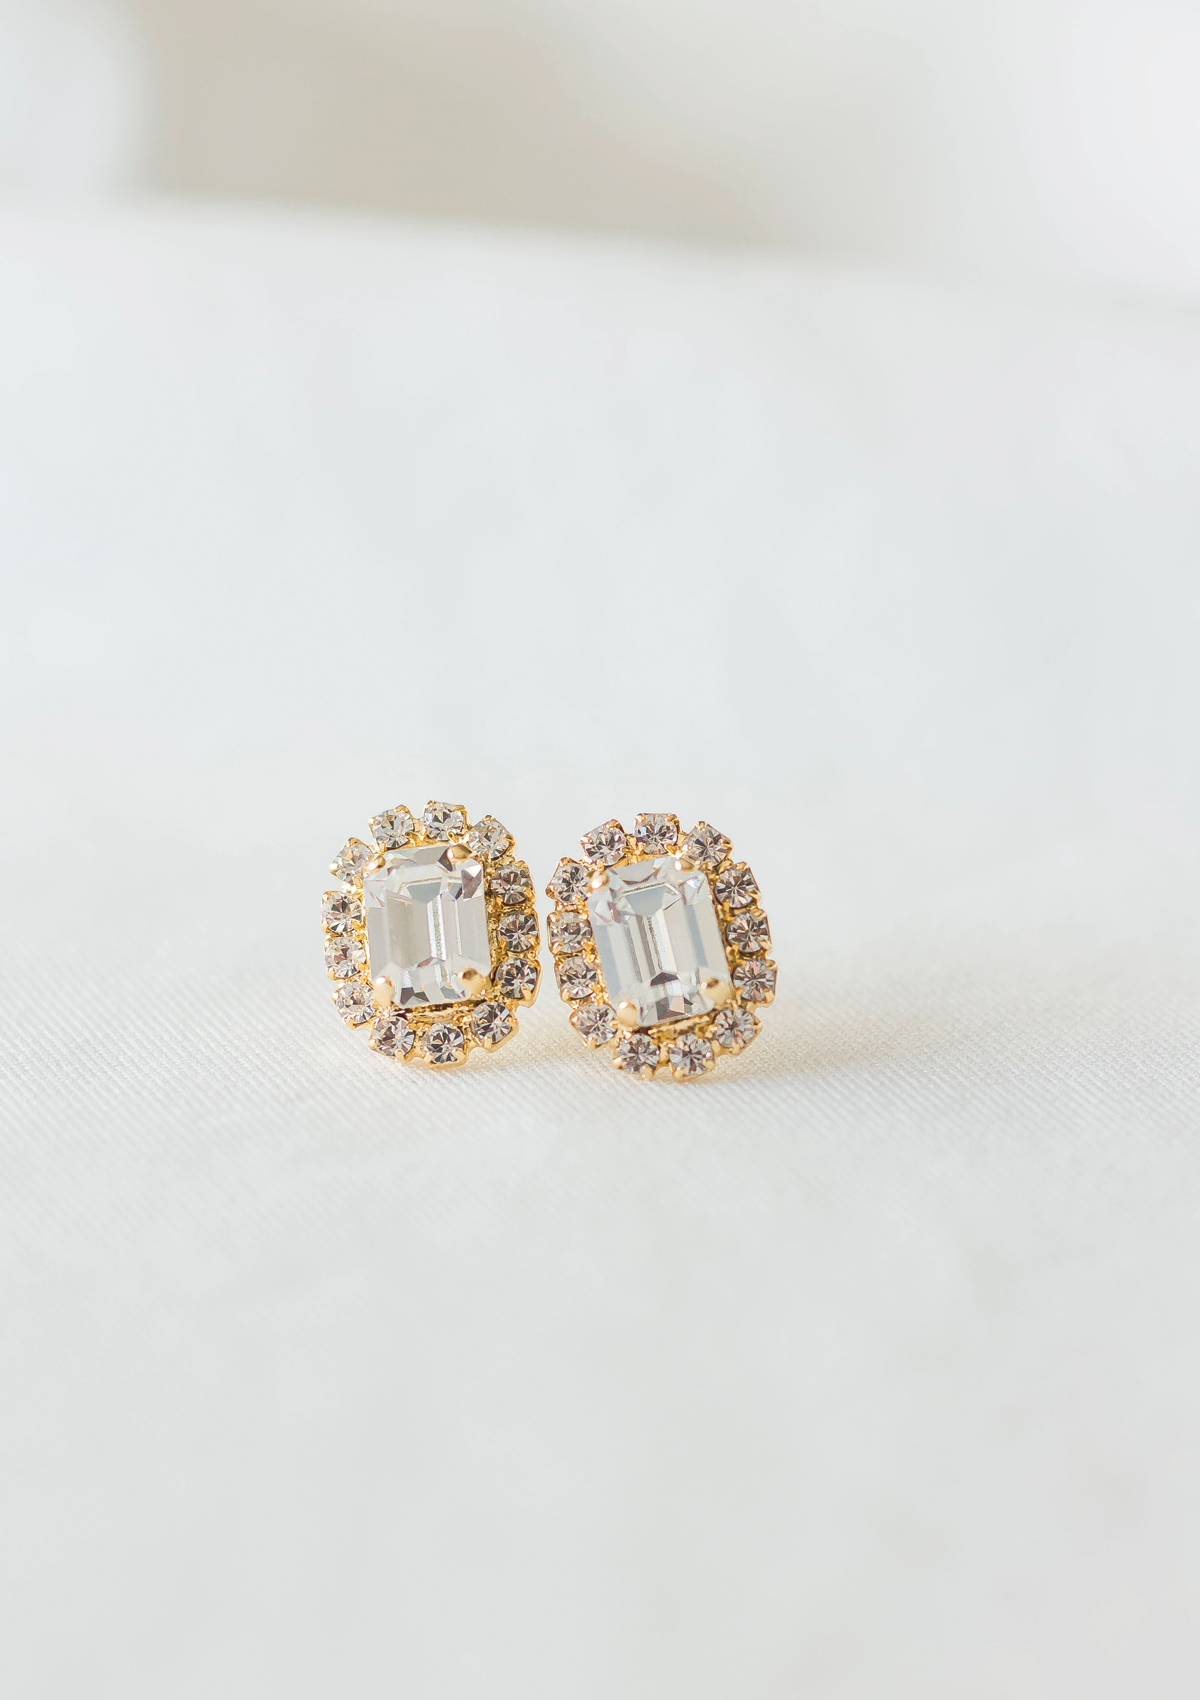 Cambridge Earrings, jewelry designed with Glamour, royalty and elegance in mind by Sarah Gauci in Malta. Crystal. 24K gold plated. 